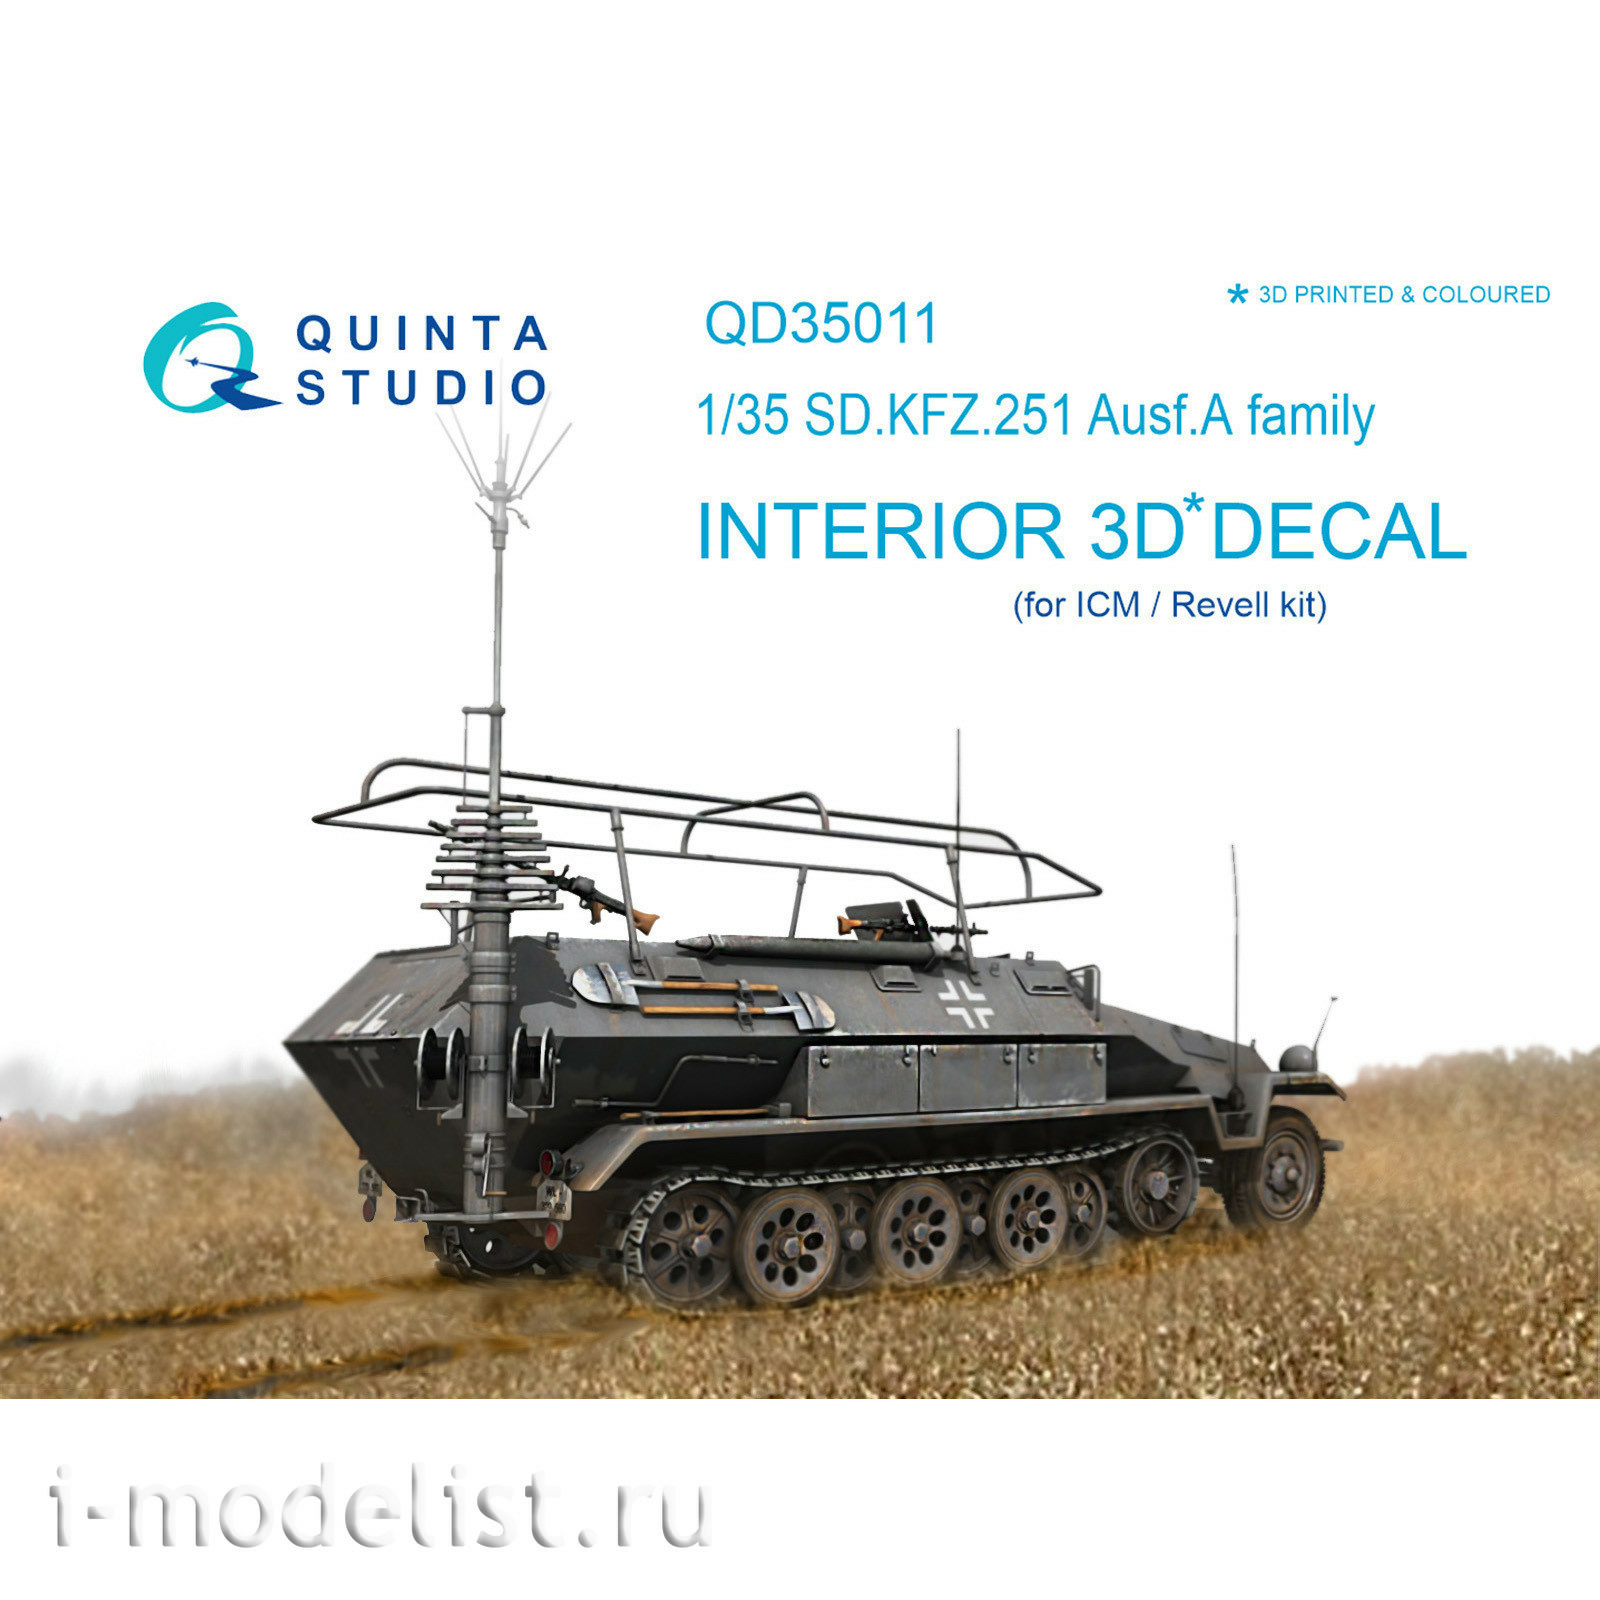 QD35011 Quinta Studio 1/35 3D Cabin interior Decal for KFZ 251 Ausf.A (for the ICM model)